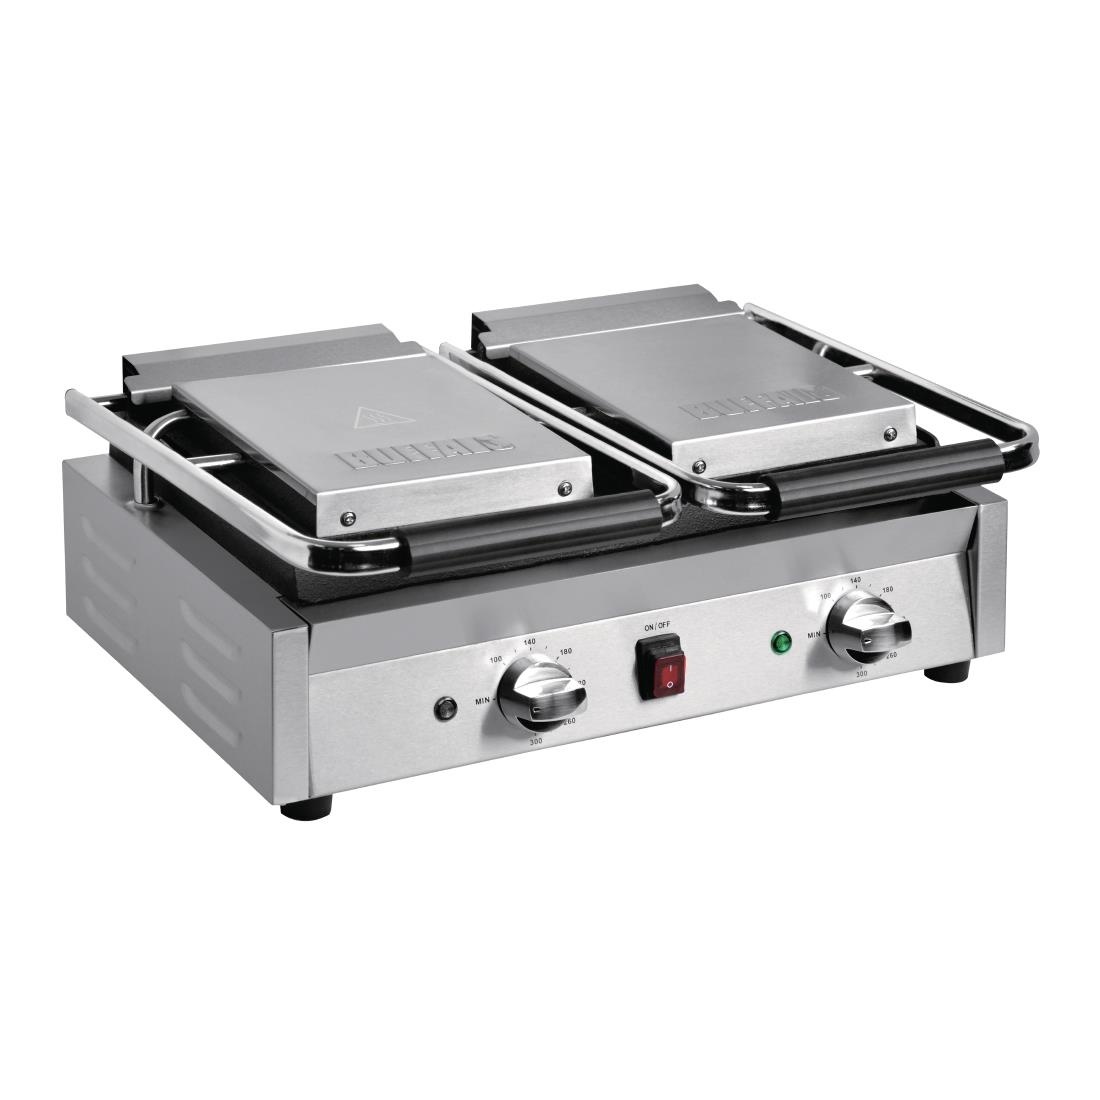 Bistro Dubbele Contactgrill Glad/Glad | 2900W | 550x395x(H)210mm